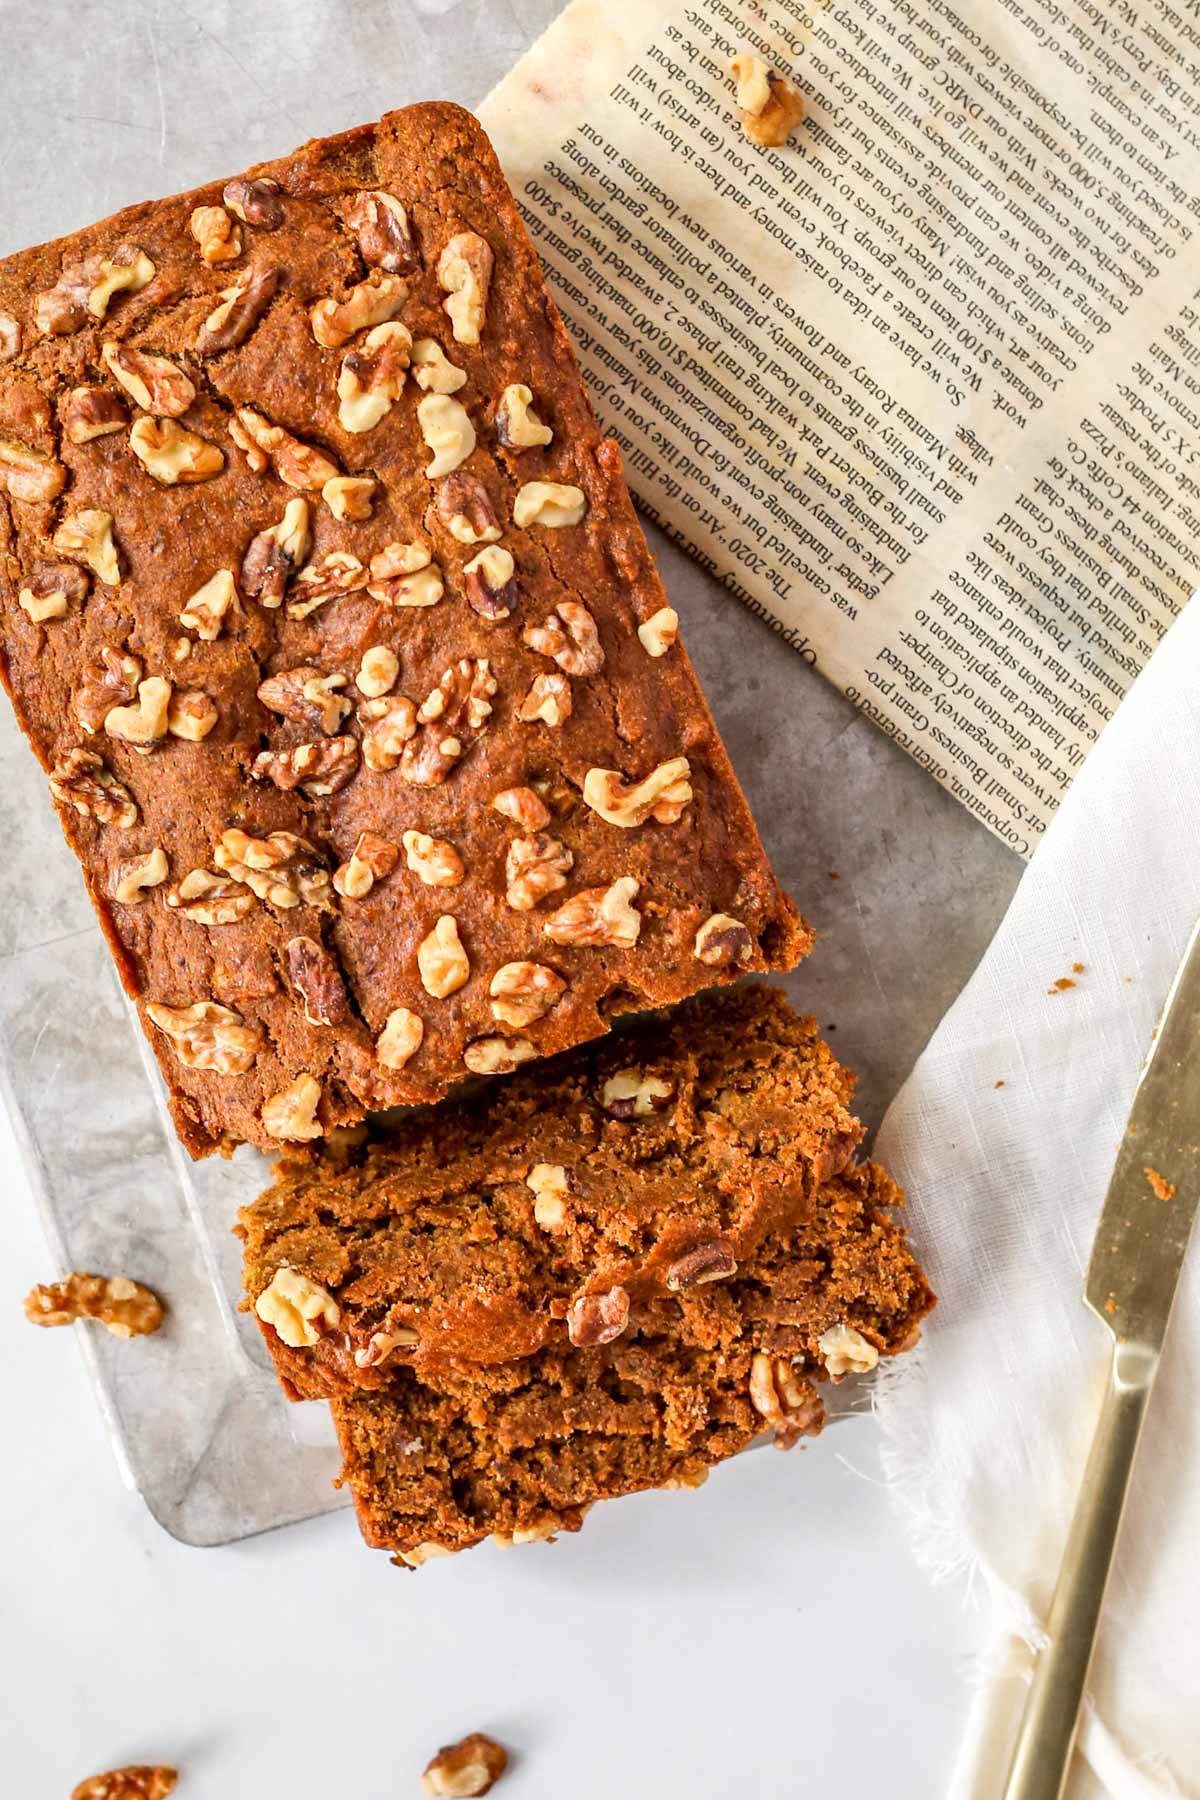 a loaf of pumpkin bread with chopped walnuts on top. The bread is sitting on a gray tray.